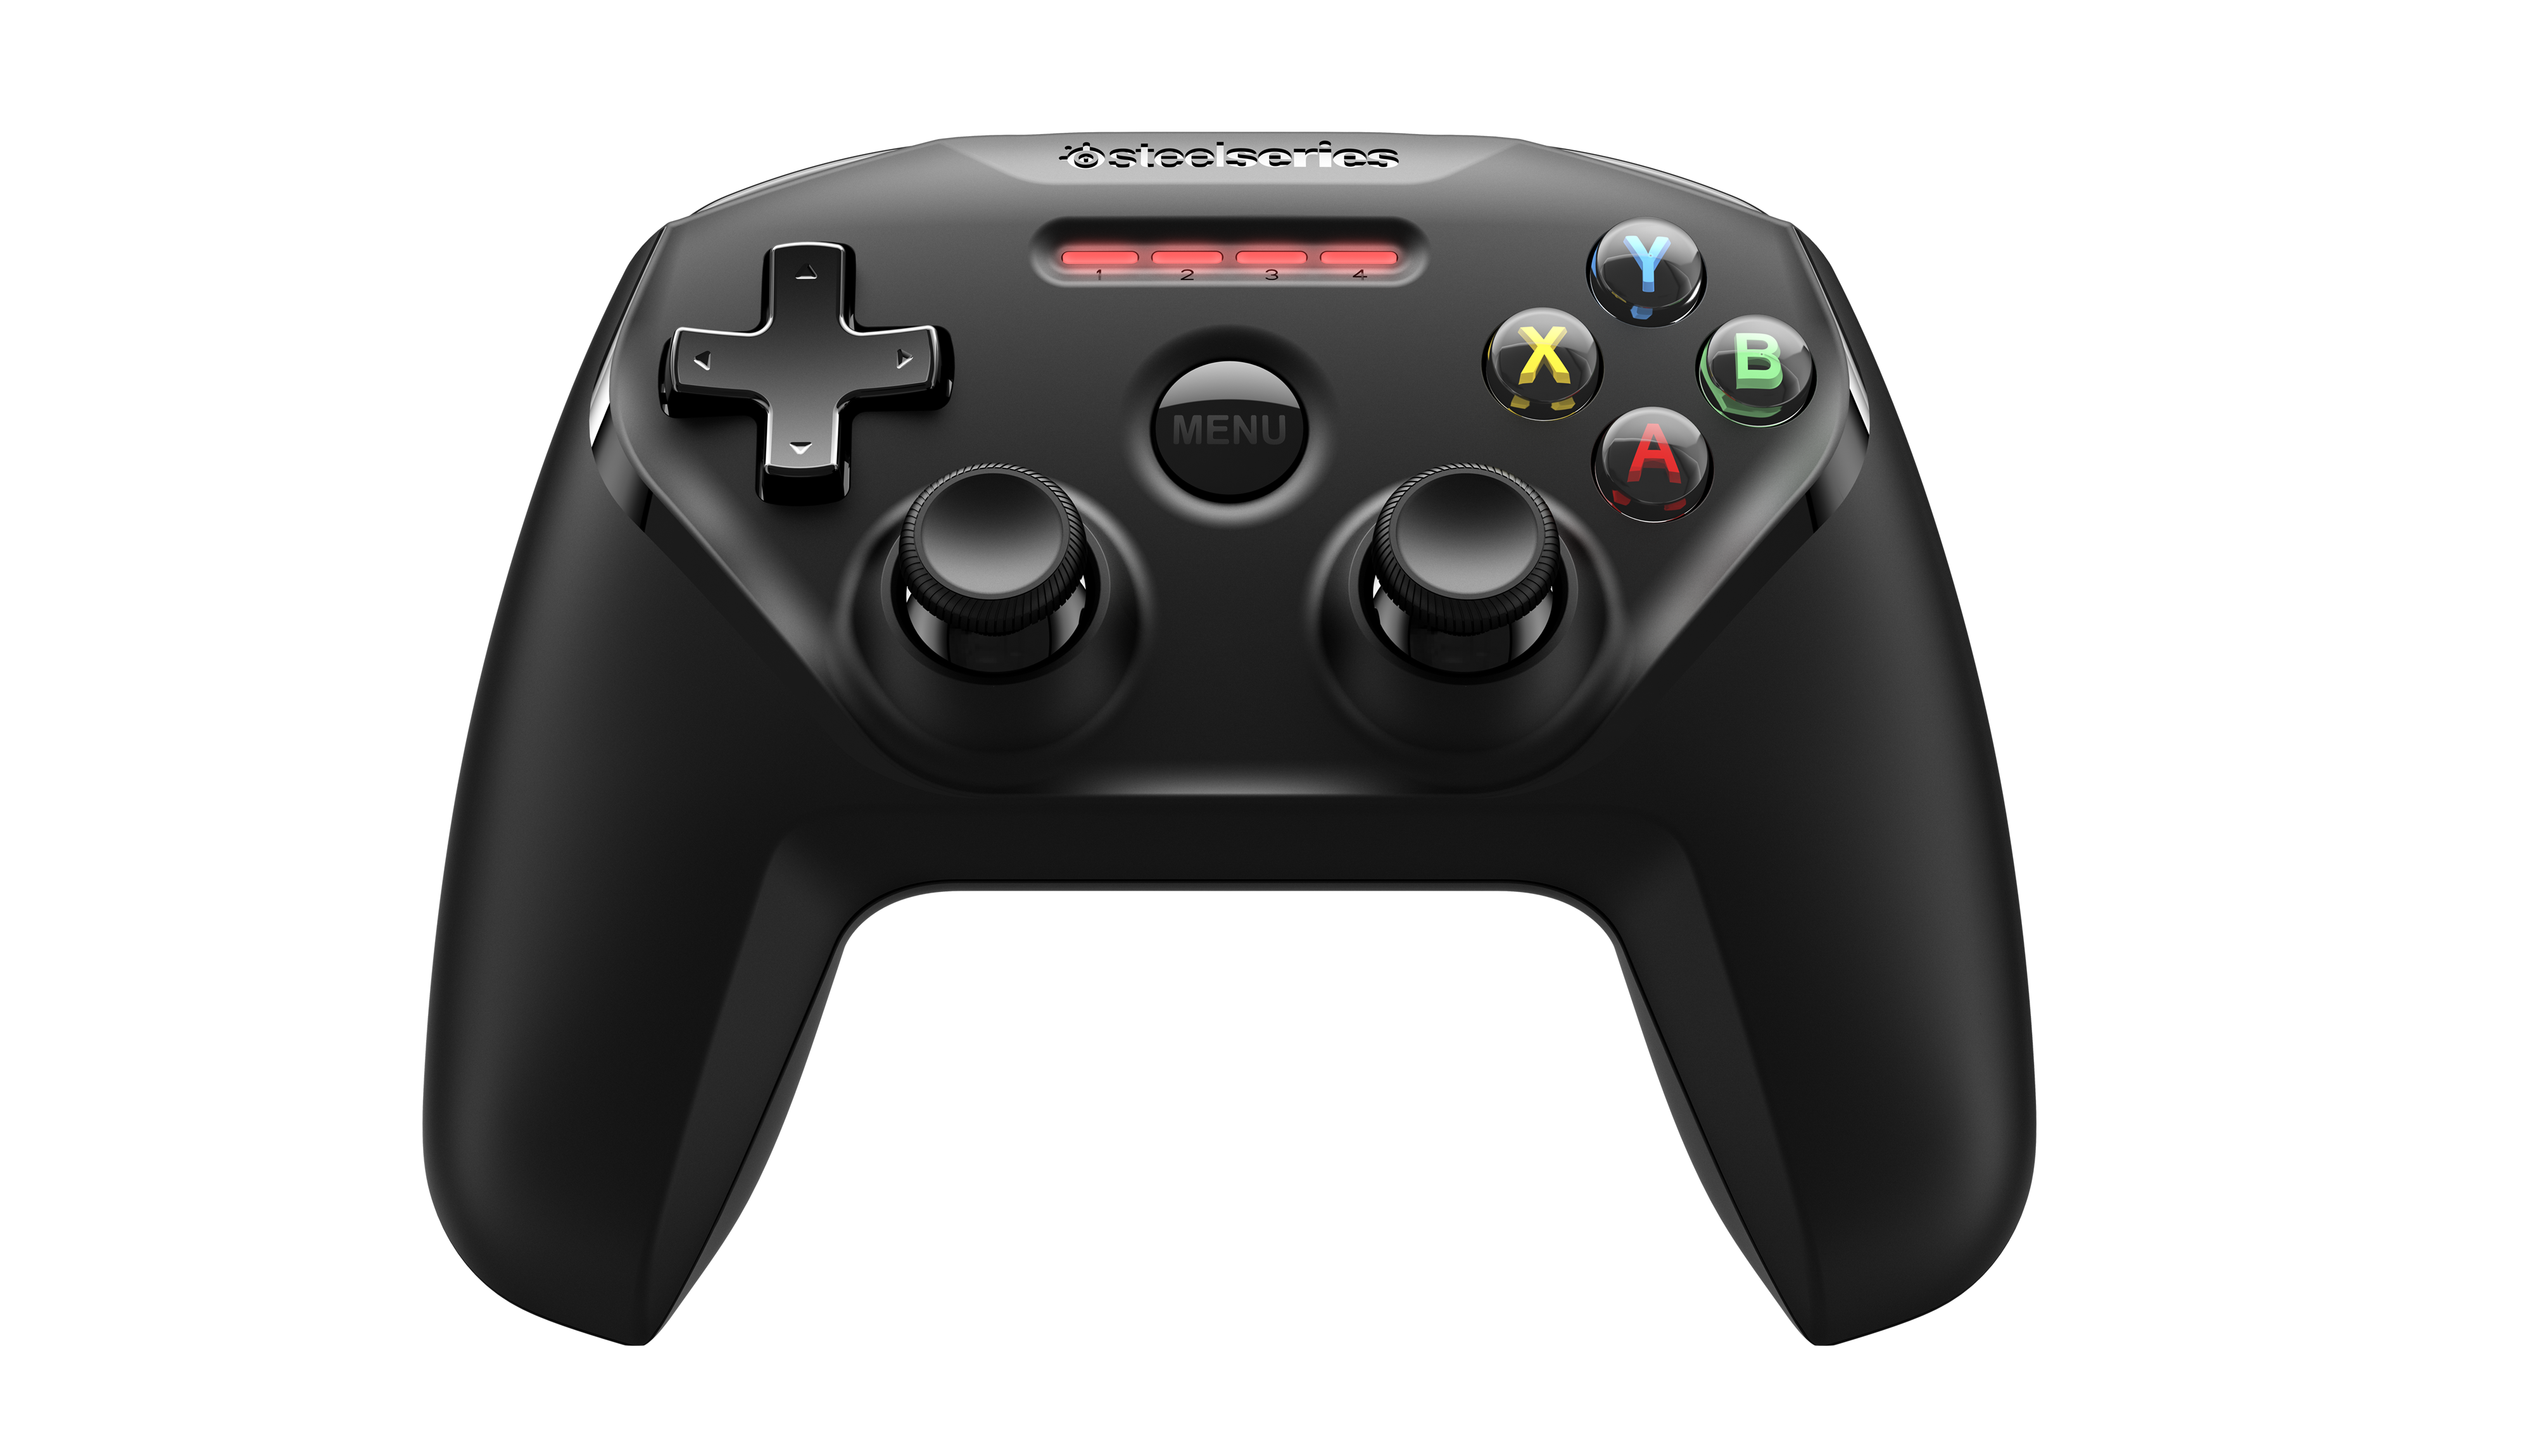 Need a controller for your new Apple TV? Don’t worry, SteelSeries has that covered